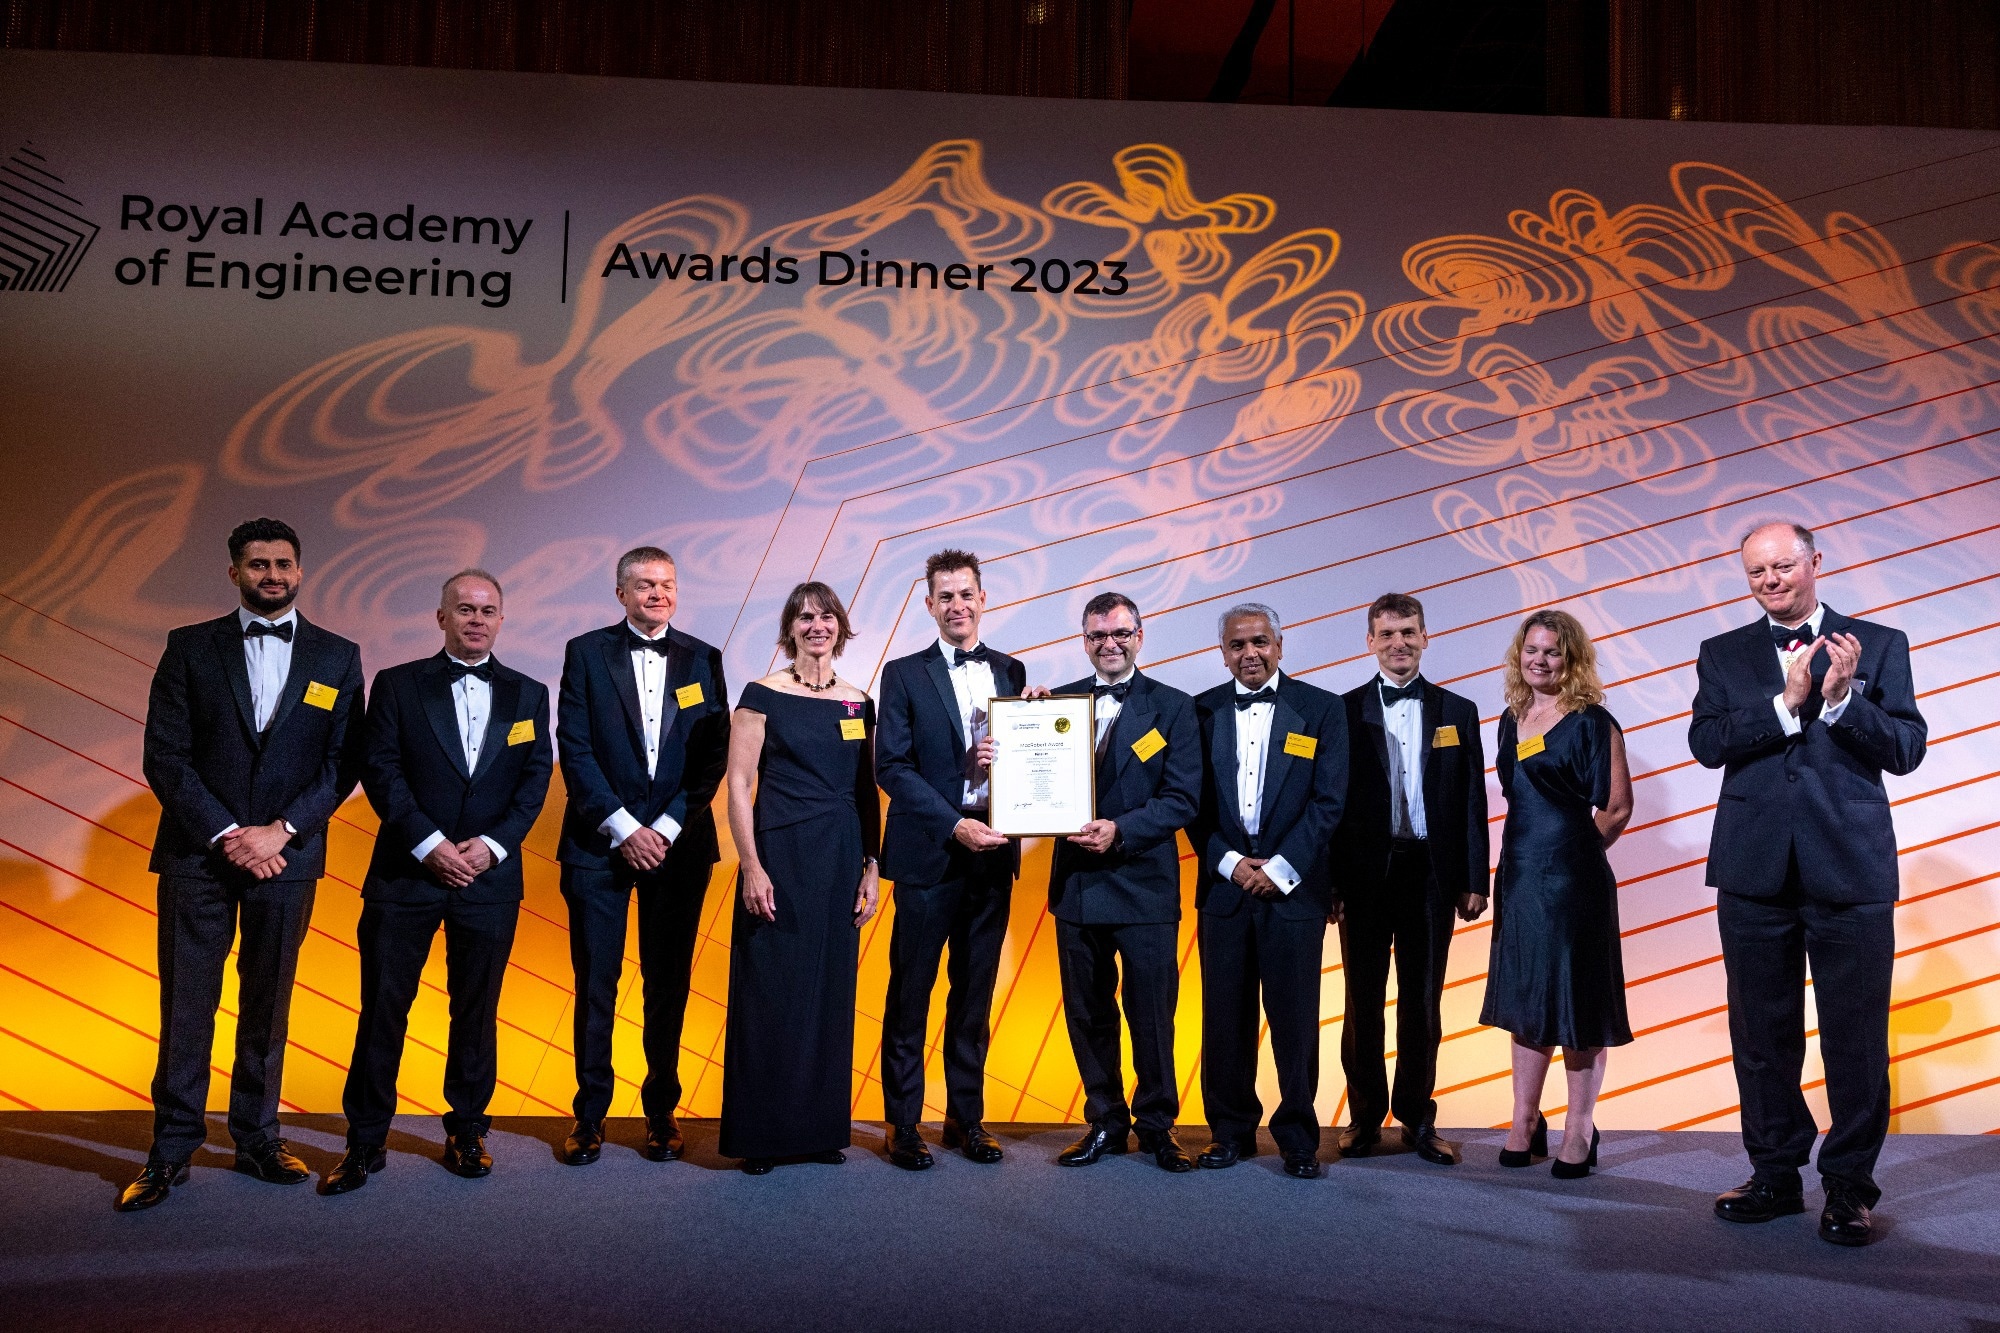 Clean Energy Technology Set to Decarbonise the World Wins UK’s Top Award for Engineering Innovation